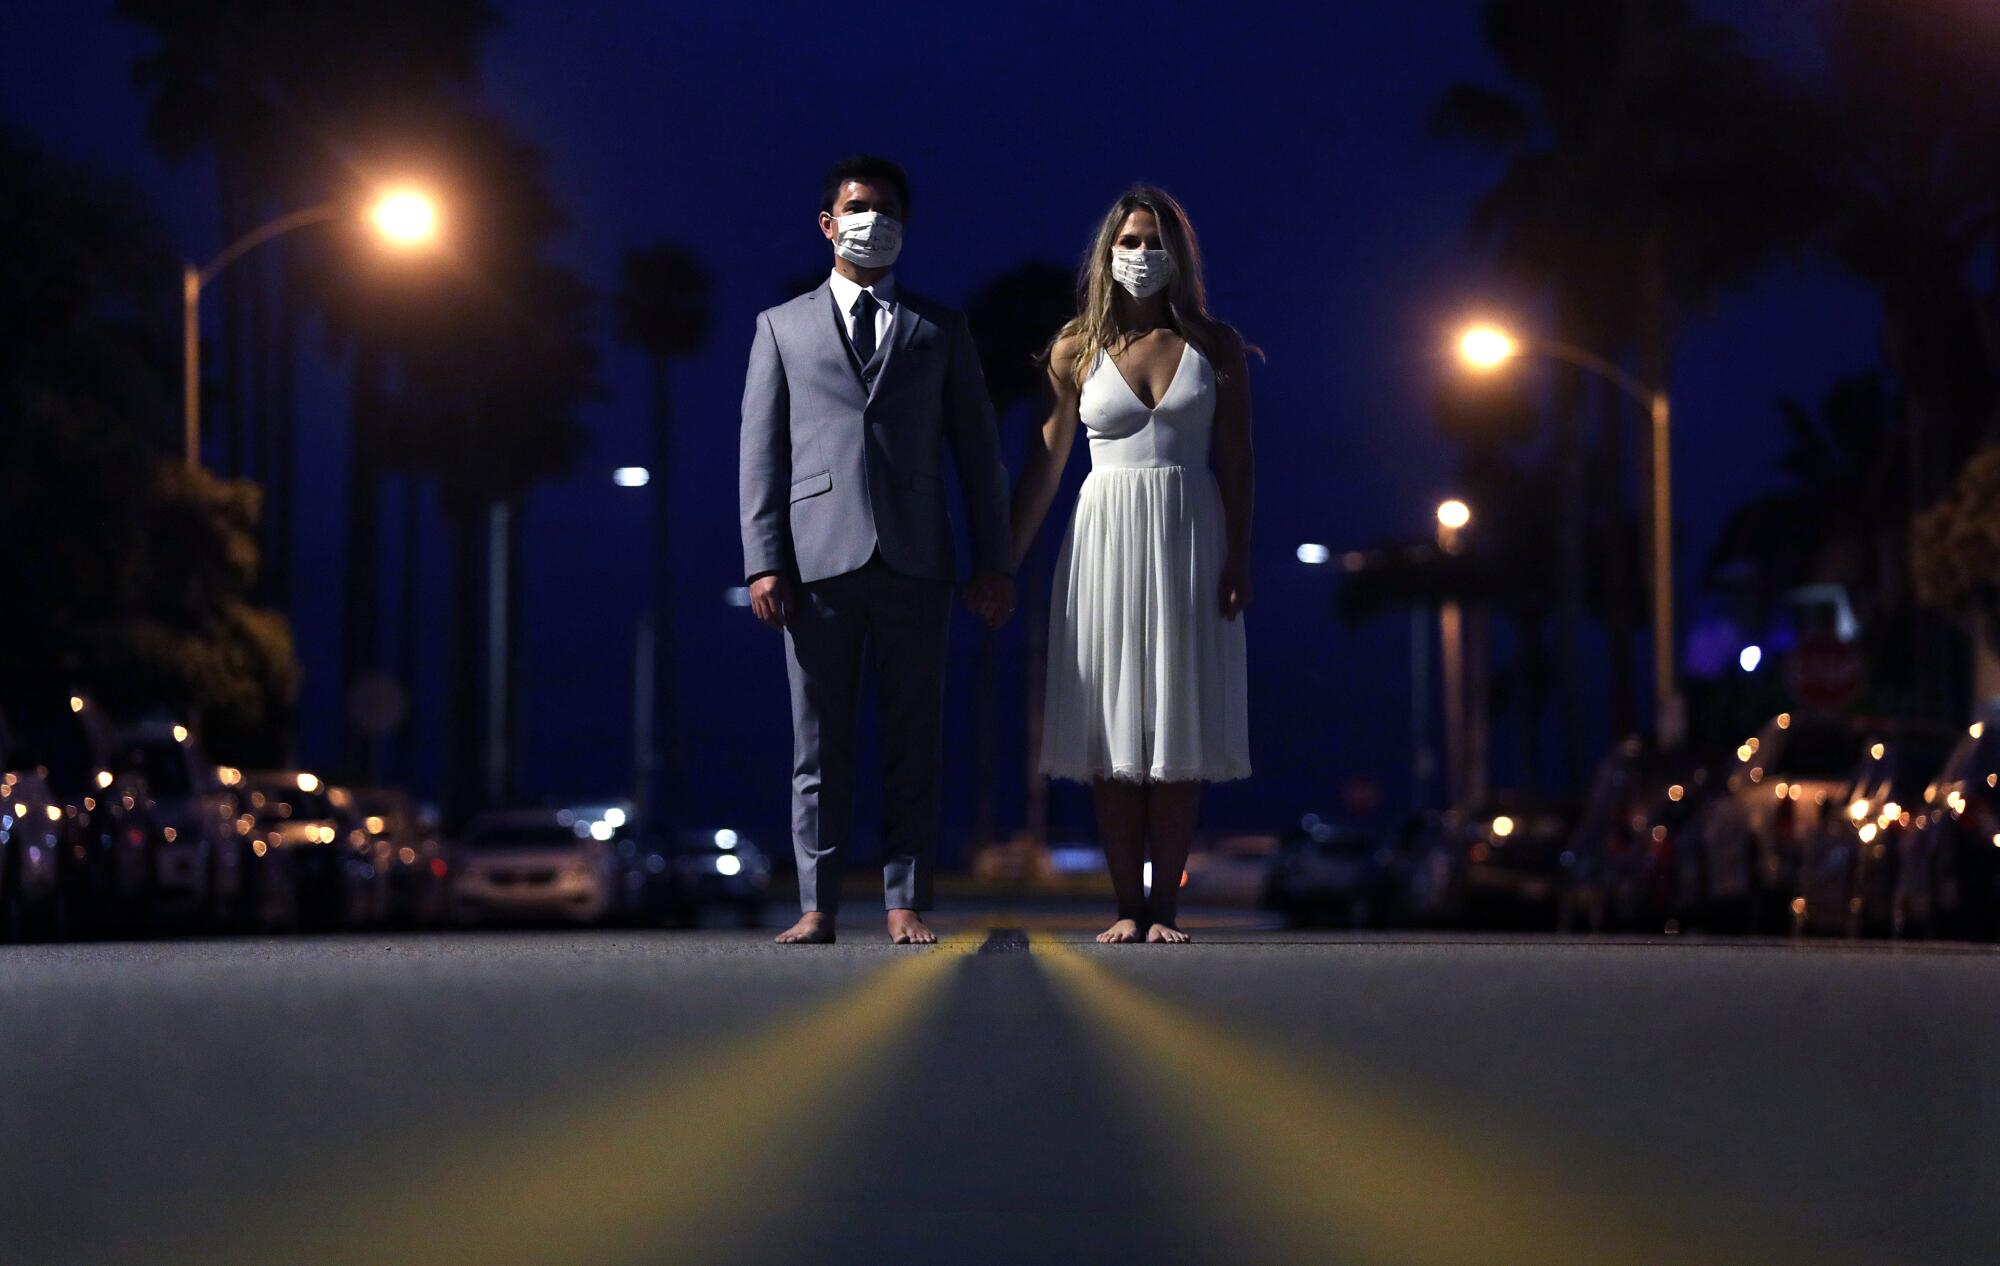 Jonathan Gryn and Debbie Rey model their wedding clothes barefoot in the street at night near their home in Huntington Beach.